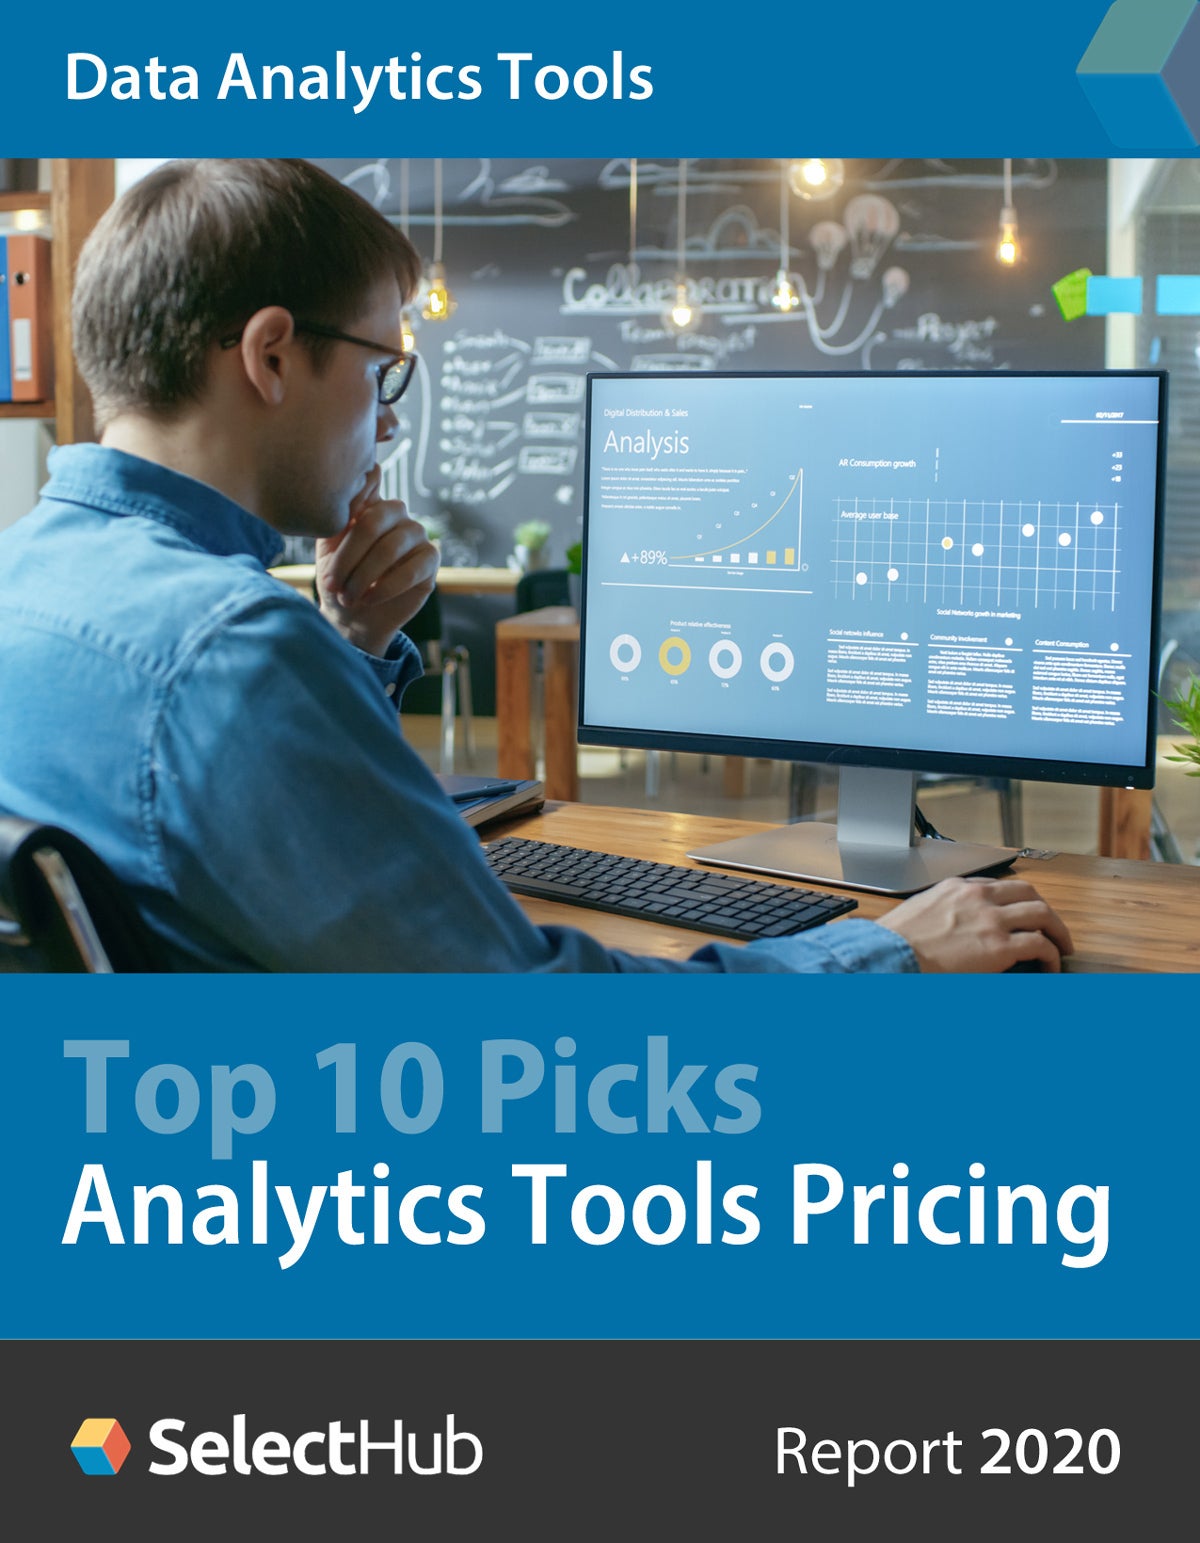 Image: Data Analytics Tools: Top 10 Pricing Guide